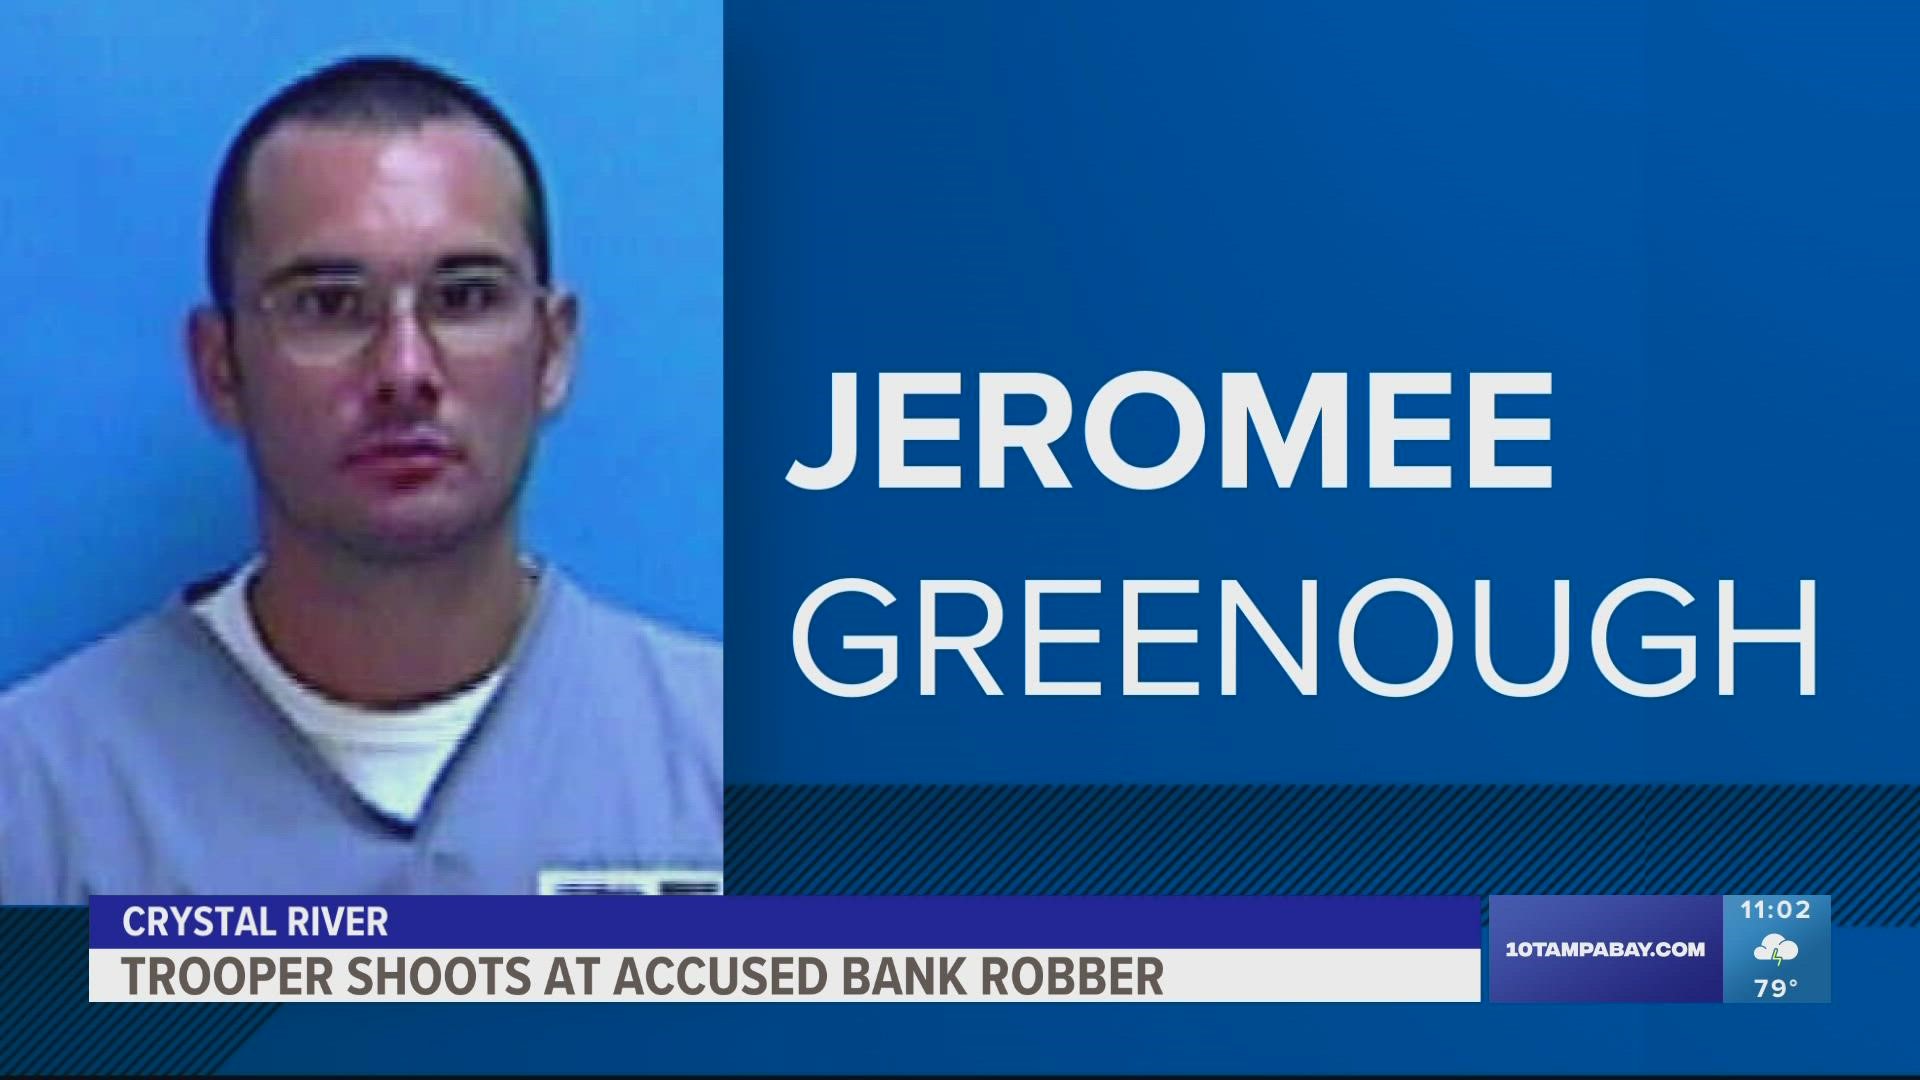 Jeromee Greenough has been convicted of at least four previous bank robberies and has served time in prison.